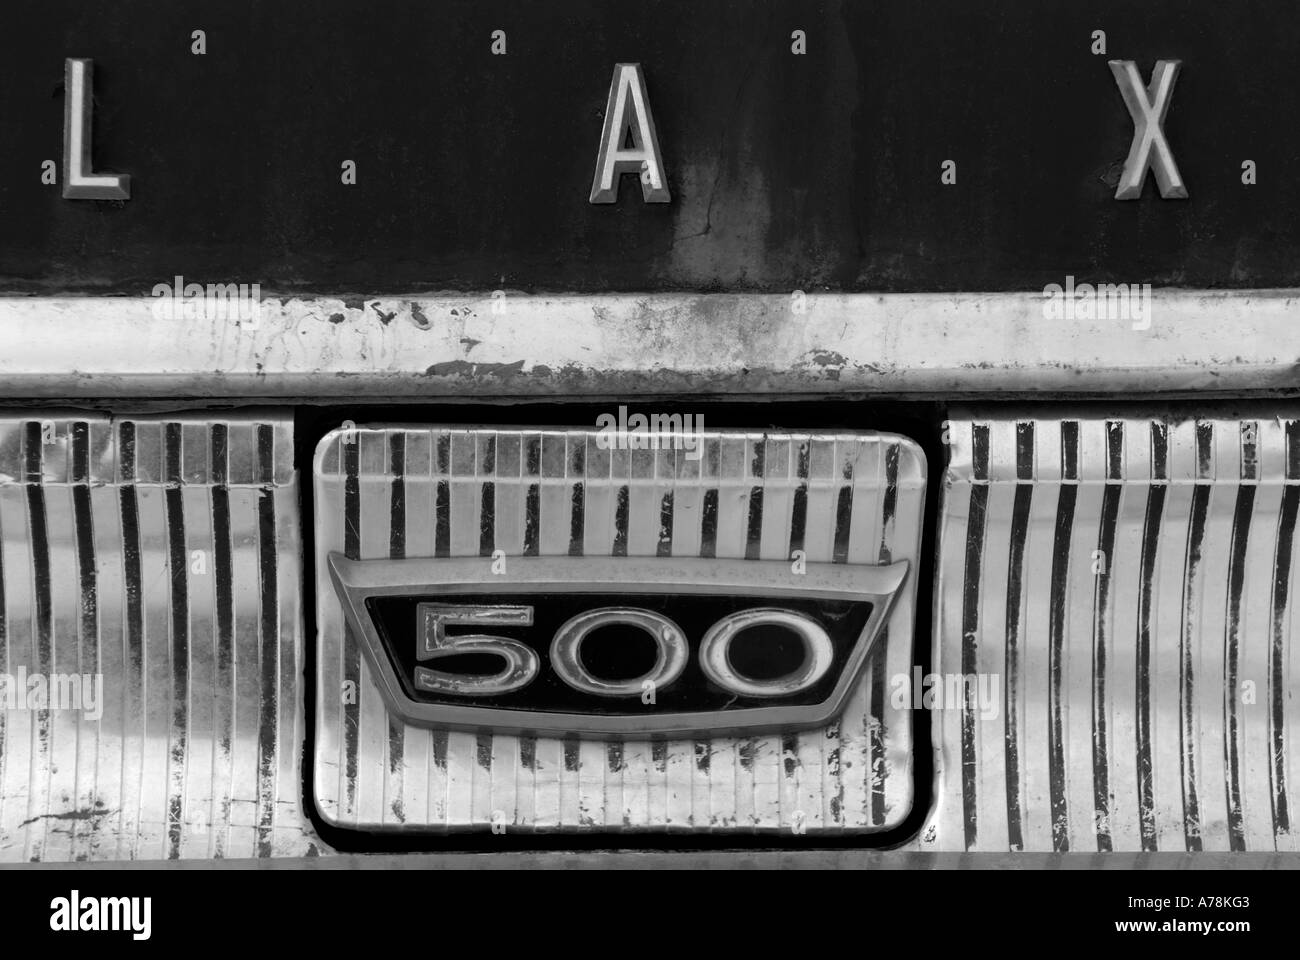 Galaxie 500 Close-up In Black & White Stock Photo